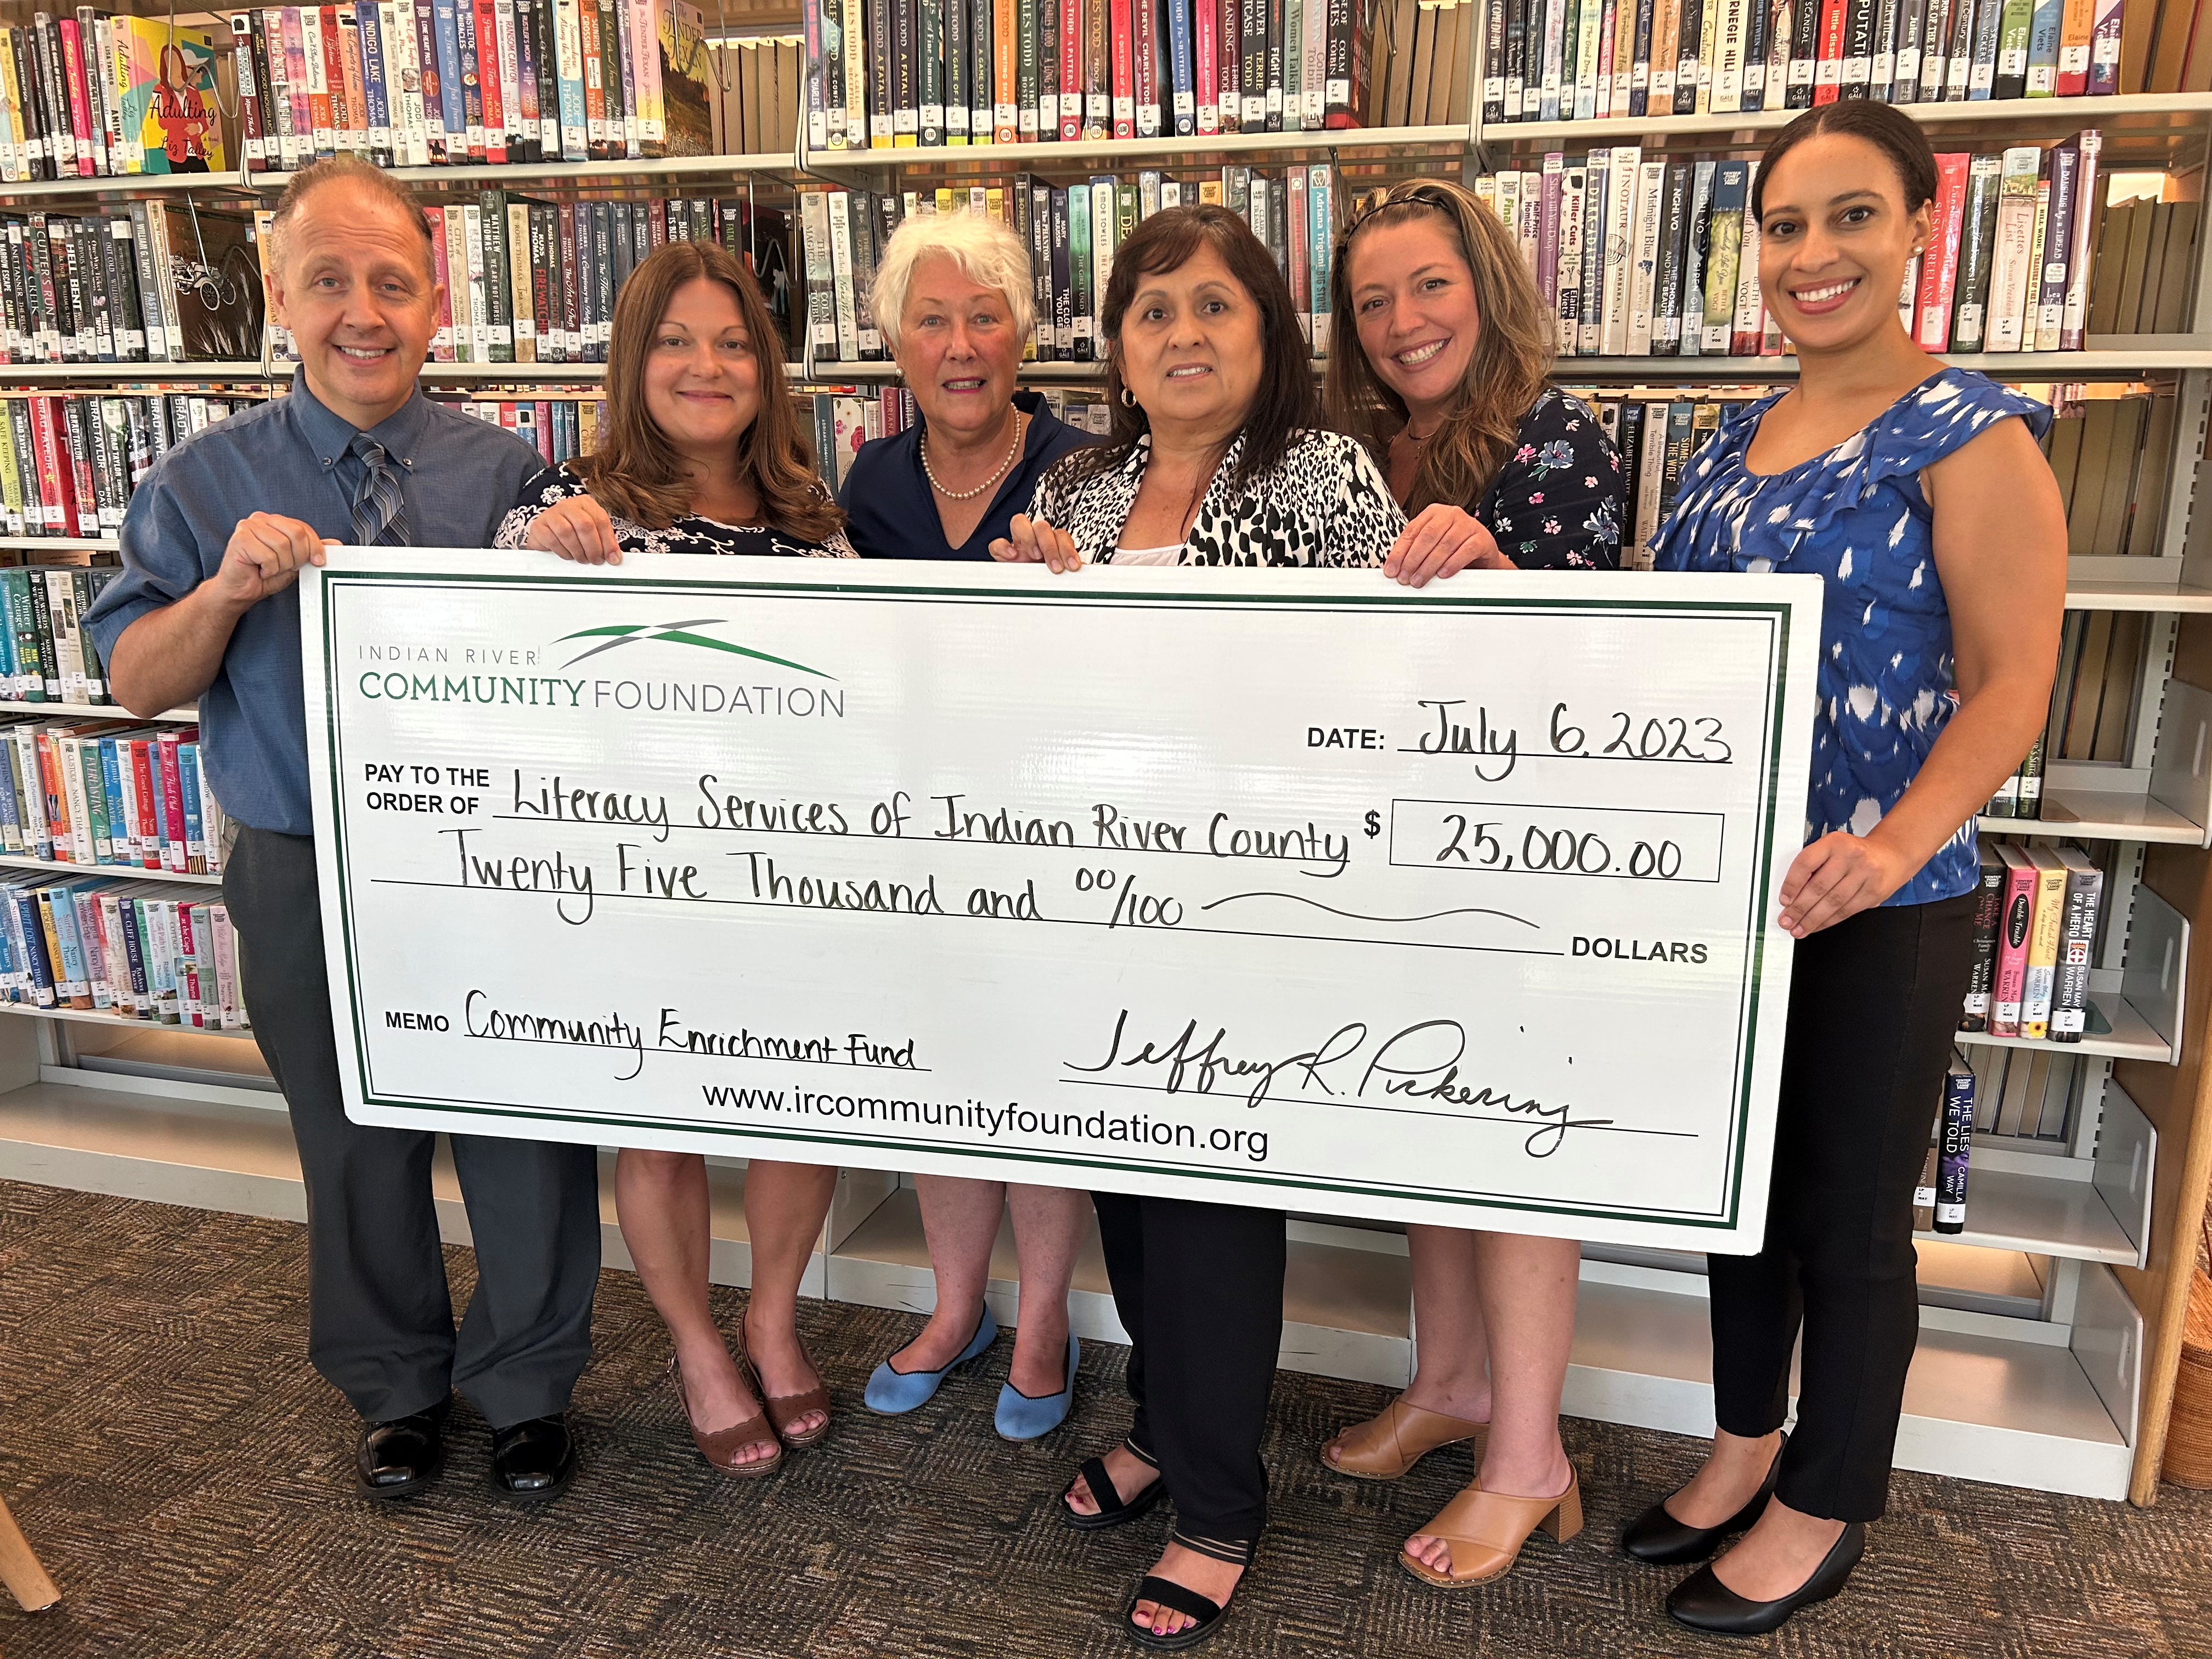 IRCF Awards Literacy Services $25,000